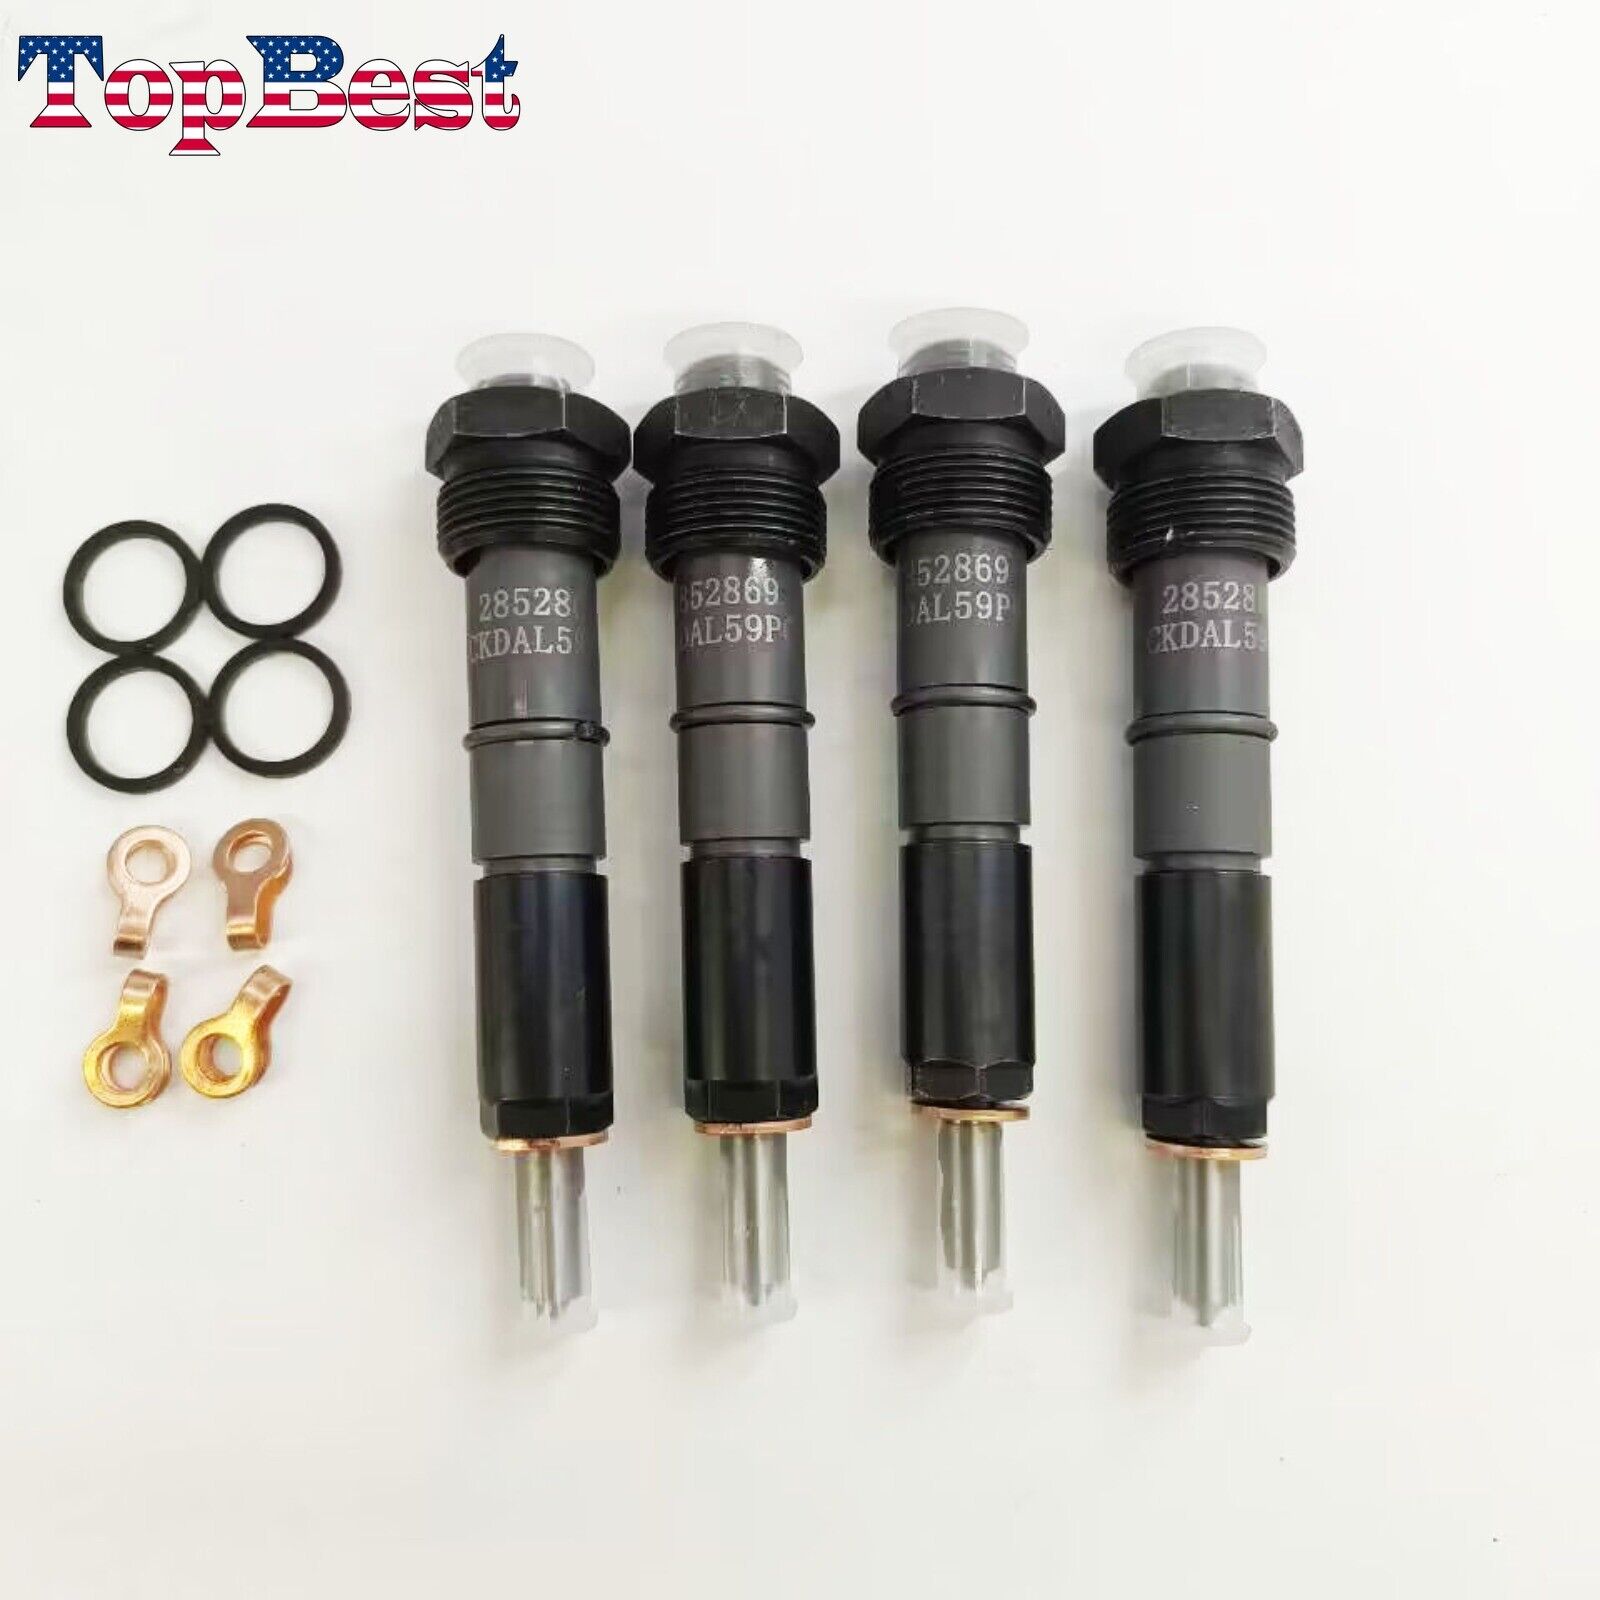 NEW 4X Fuel Injector For Case TX1055 580M 650K 750K 850K 580SM 504045834 2852869